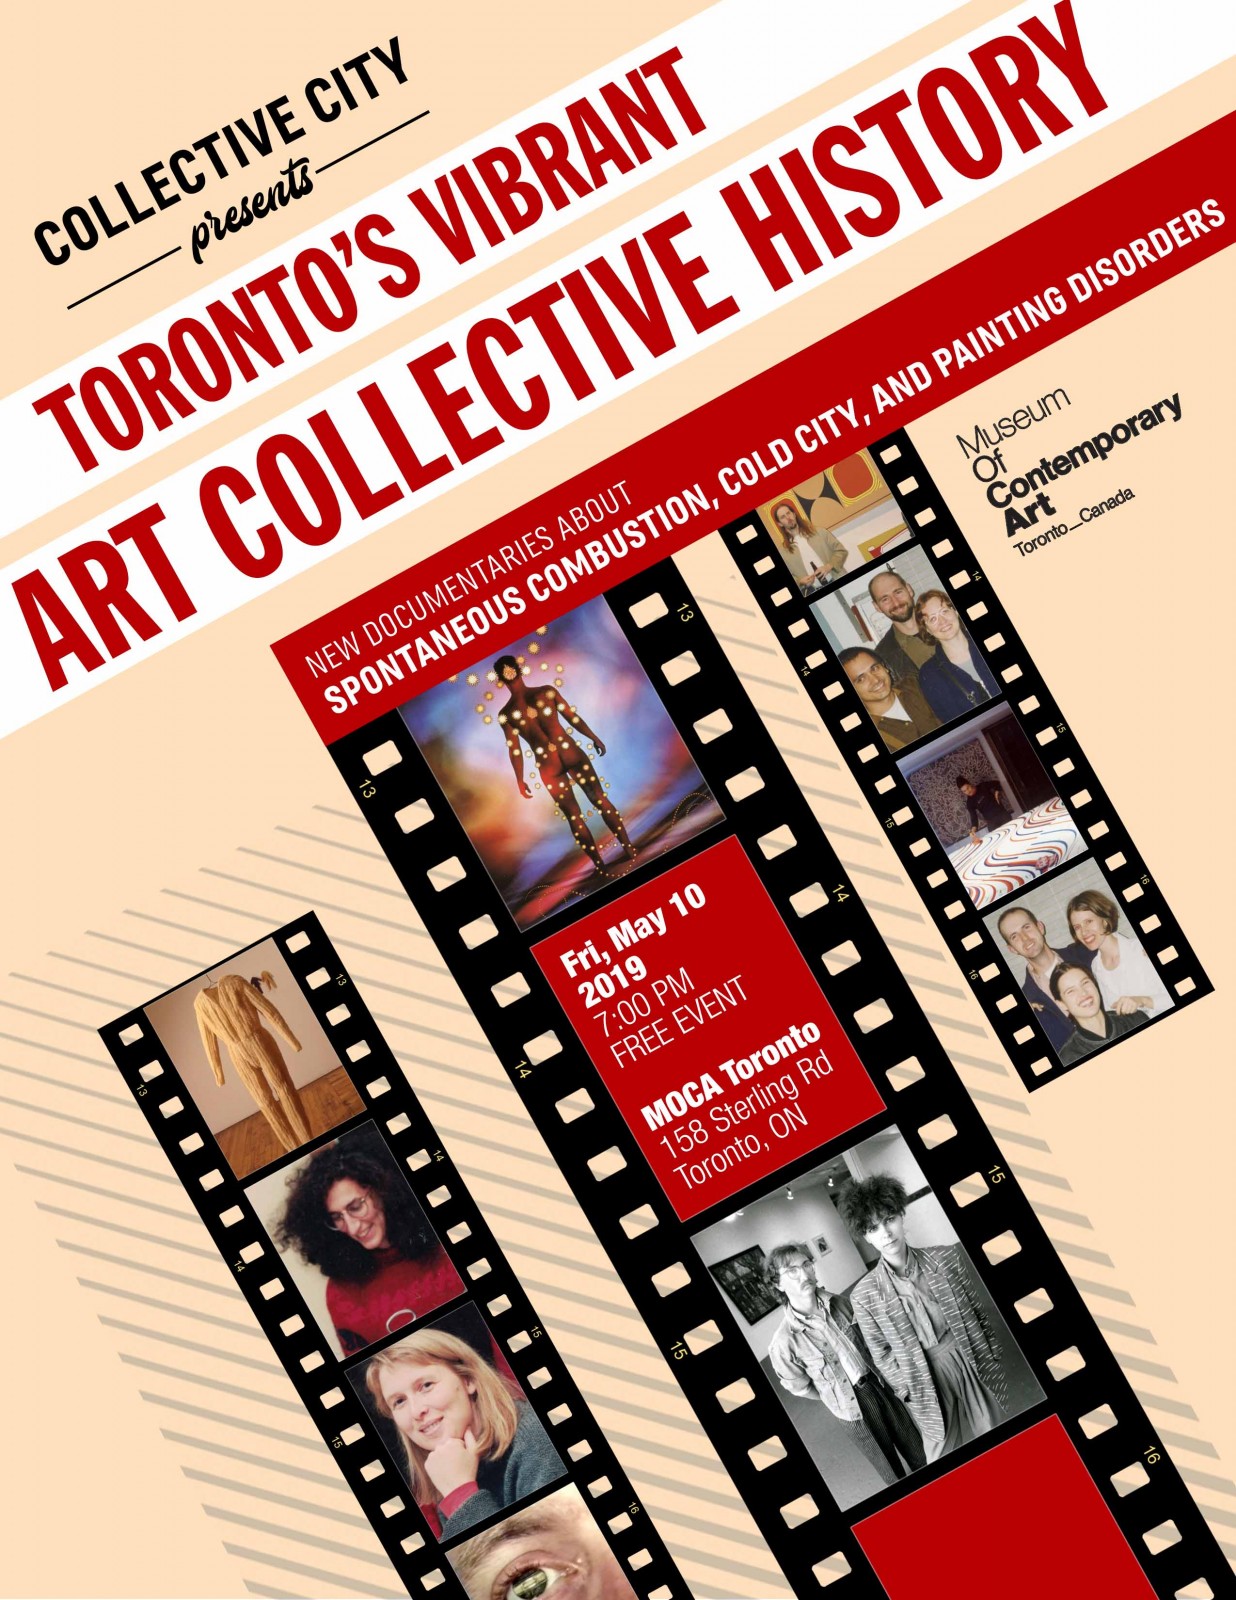 poster for Collective City screening